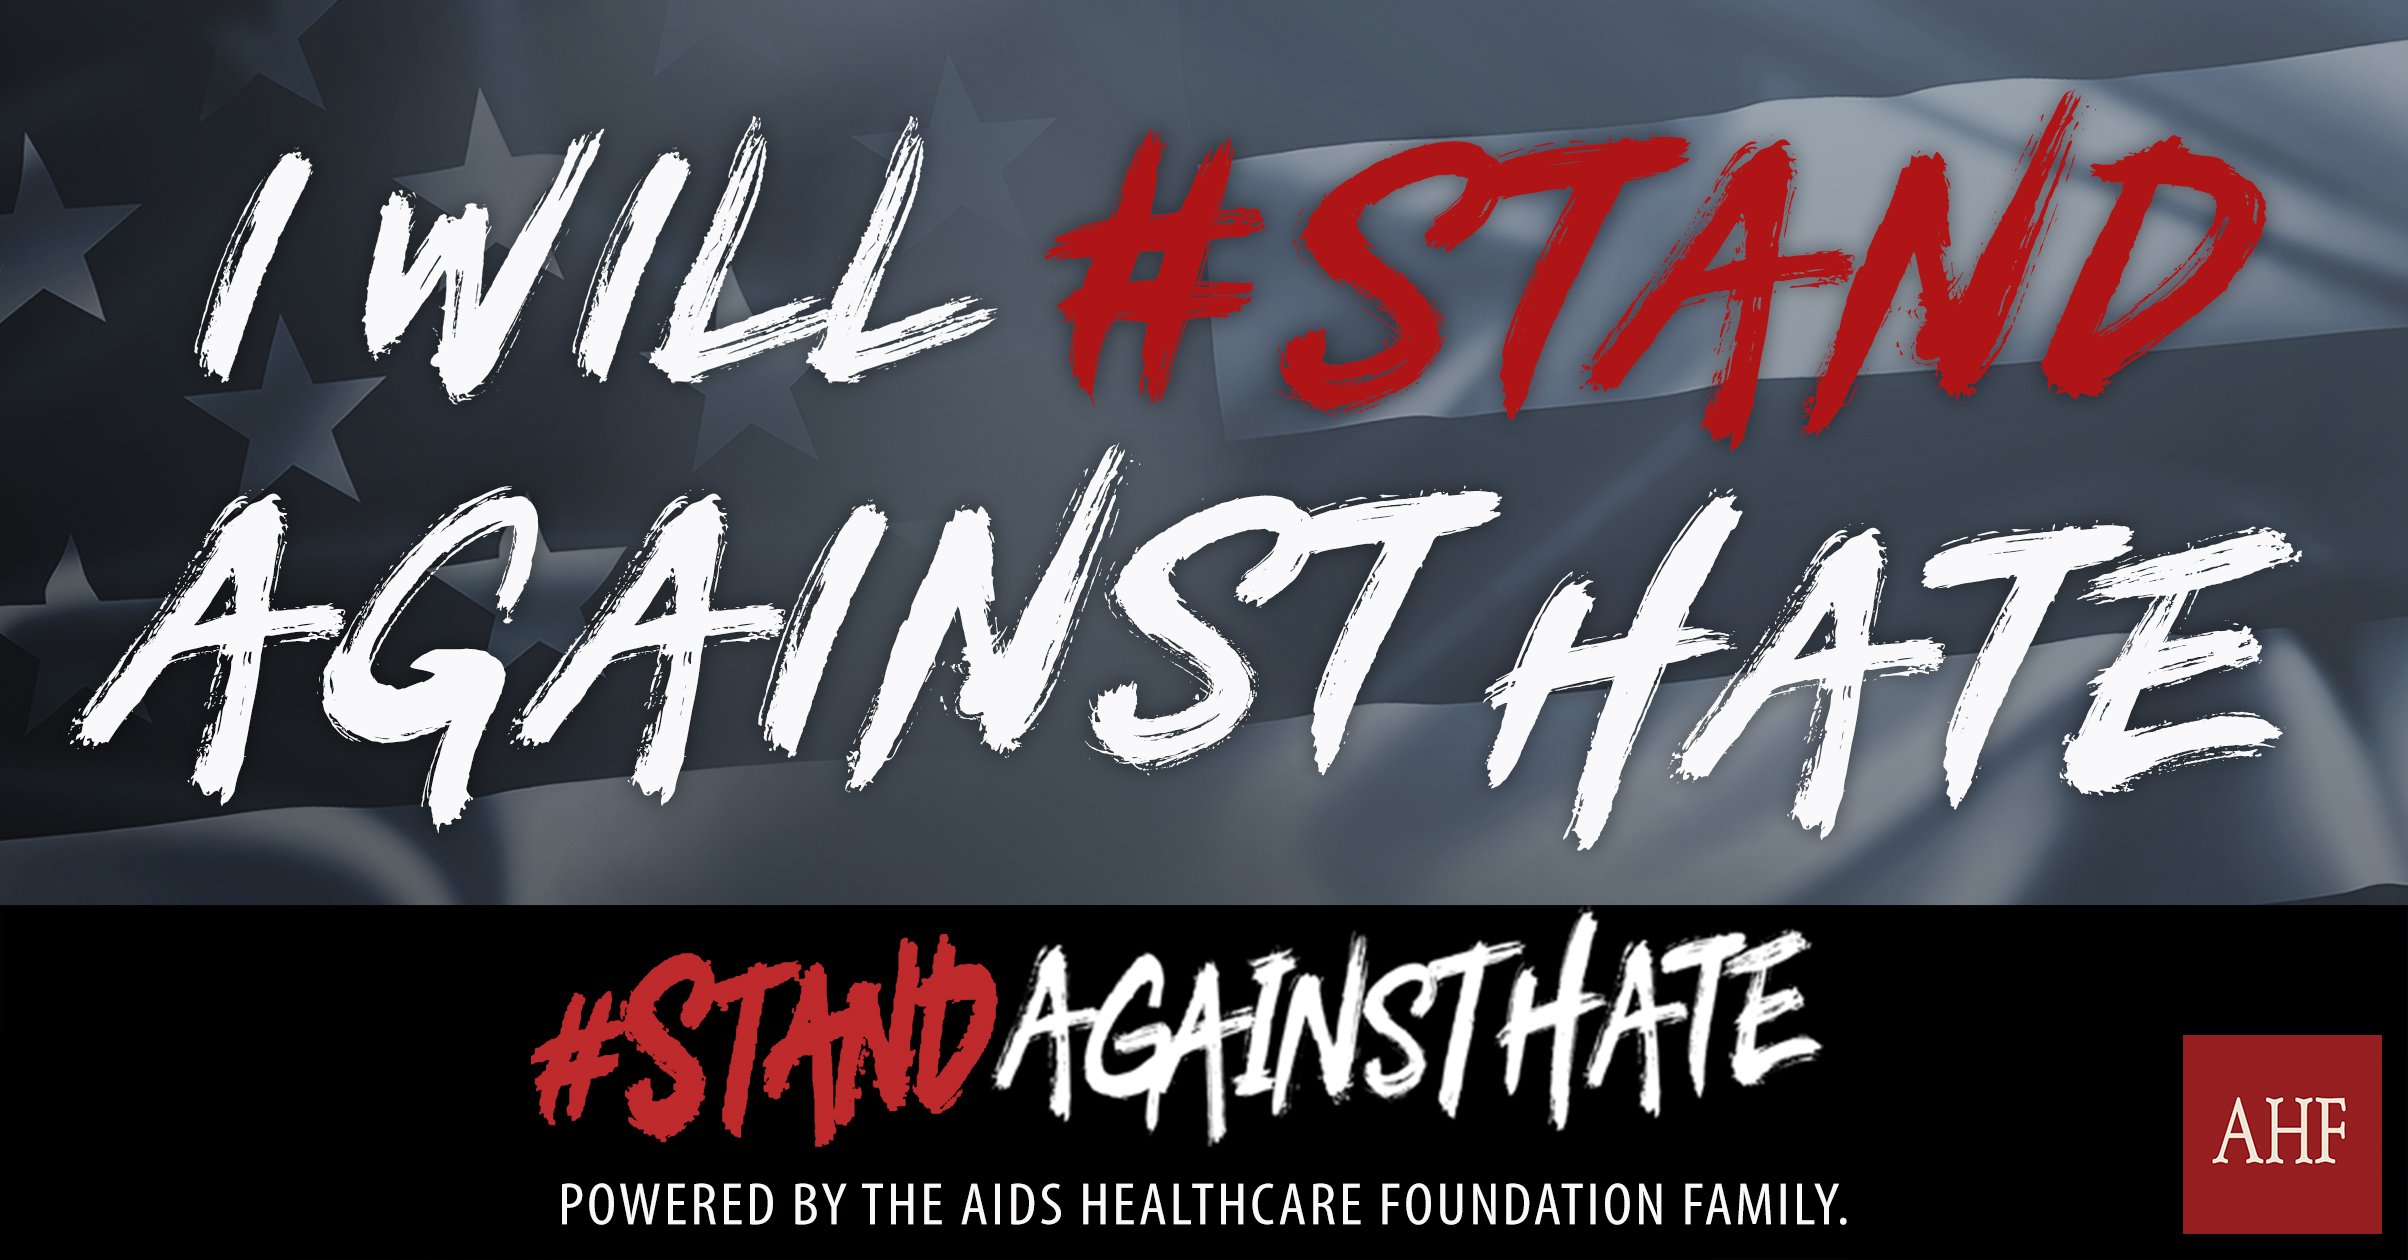 We are in a state of emergency. America is not ok! Black Americans are not ok! This is a call to action. This is a safe space. Together We Heal. With unity we will create change. We urge all to firmly decide to  #StandAgainstHate